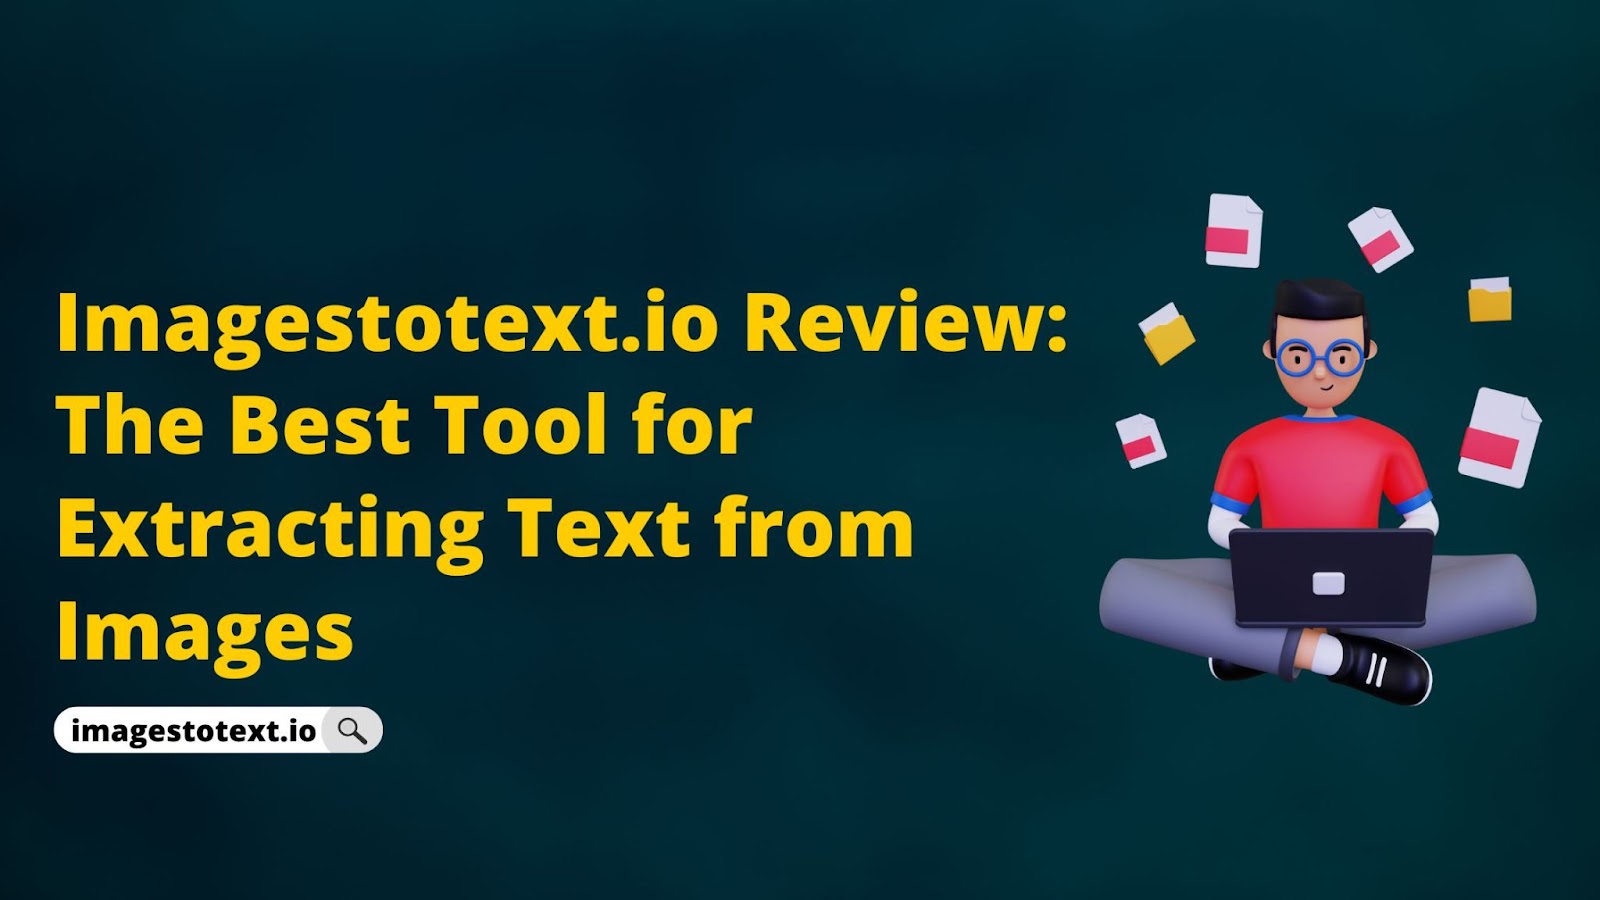 Imagestotext.io Review: The Best Tool for Extracting Text from Images